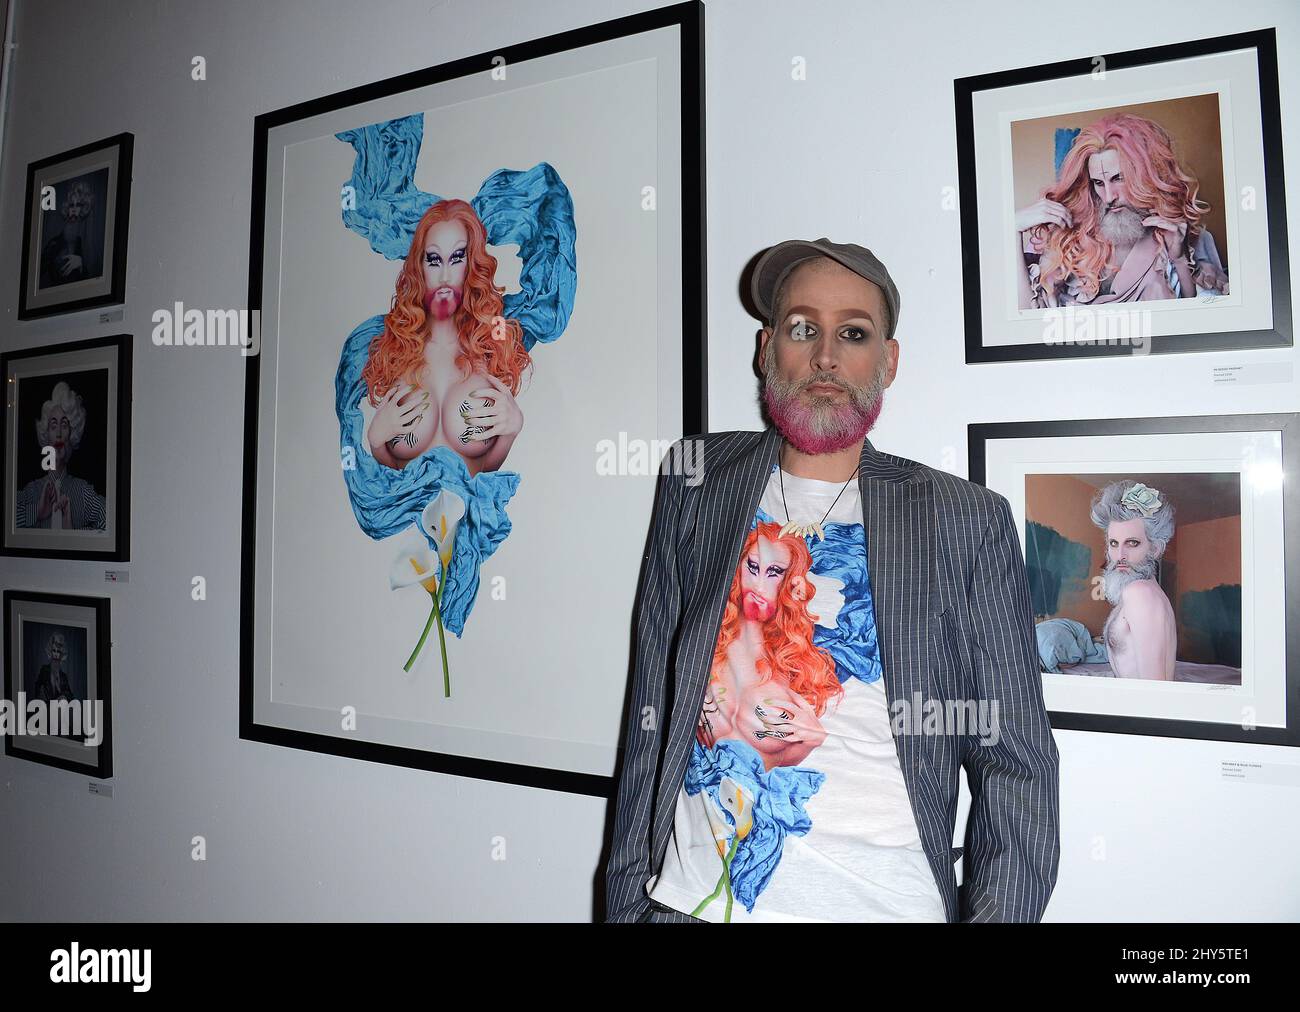 Mathu Andersen attending The Instagram Art Of Mathu Andersen Exhibition Opening Party held at World of Wonder Storefront Gallery Stock Photo